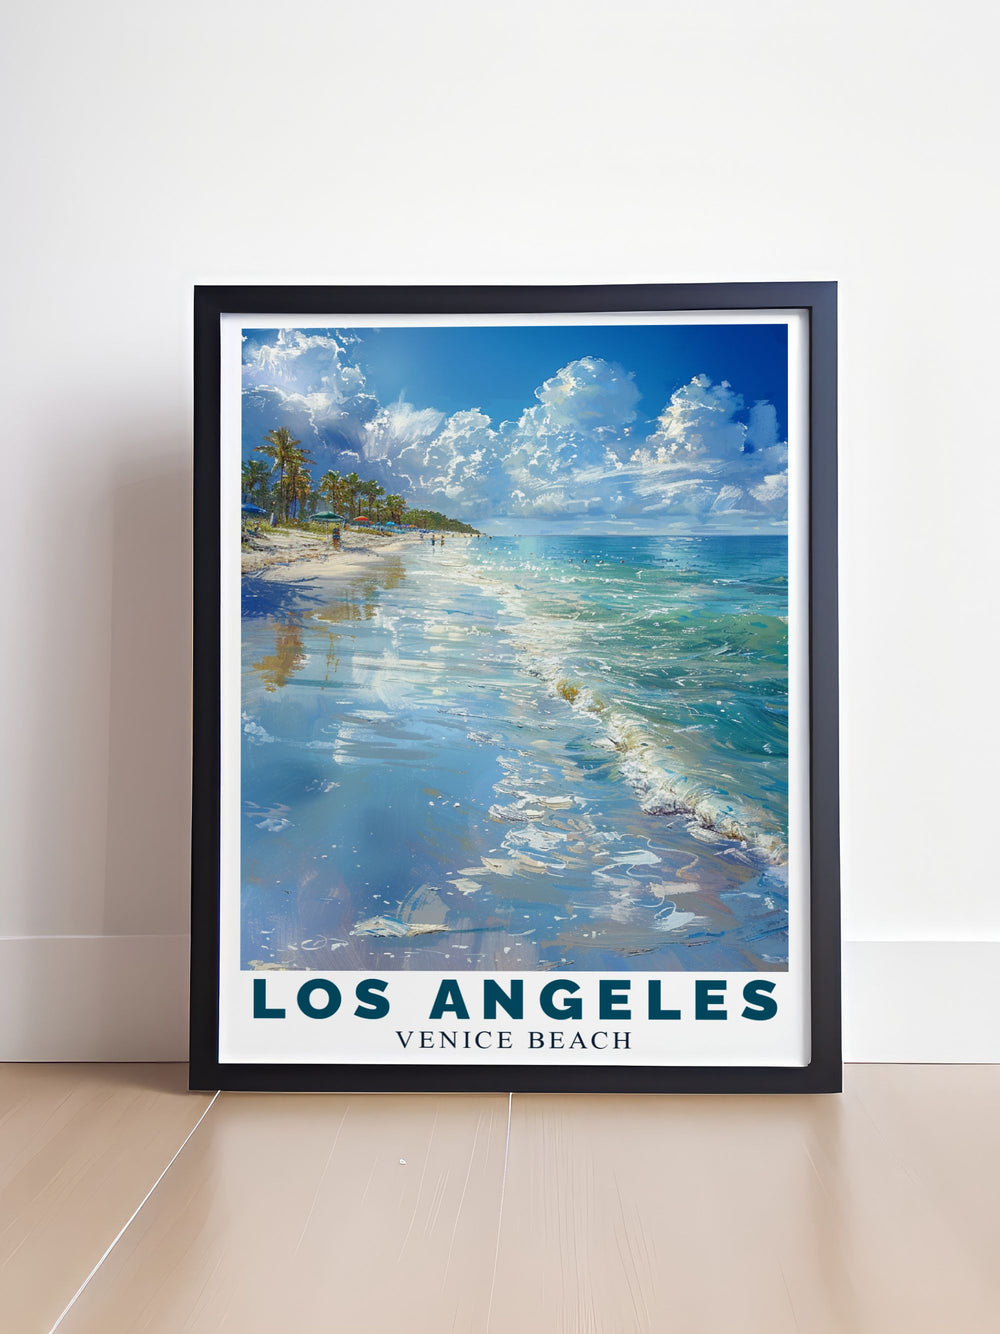 This travel poster of Los Angeles captures the citys vibrant energy and iconic landmarks, perfect for bringing the dynamic spirit of California into your home decor.